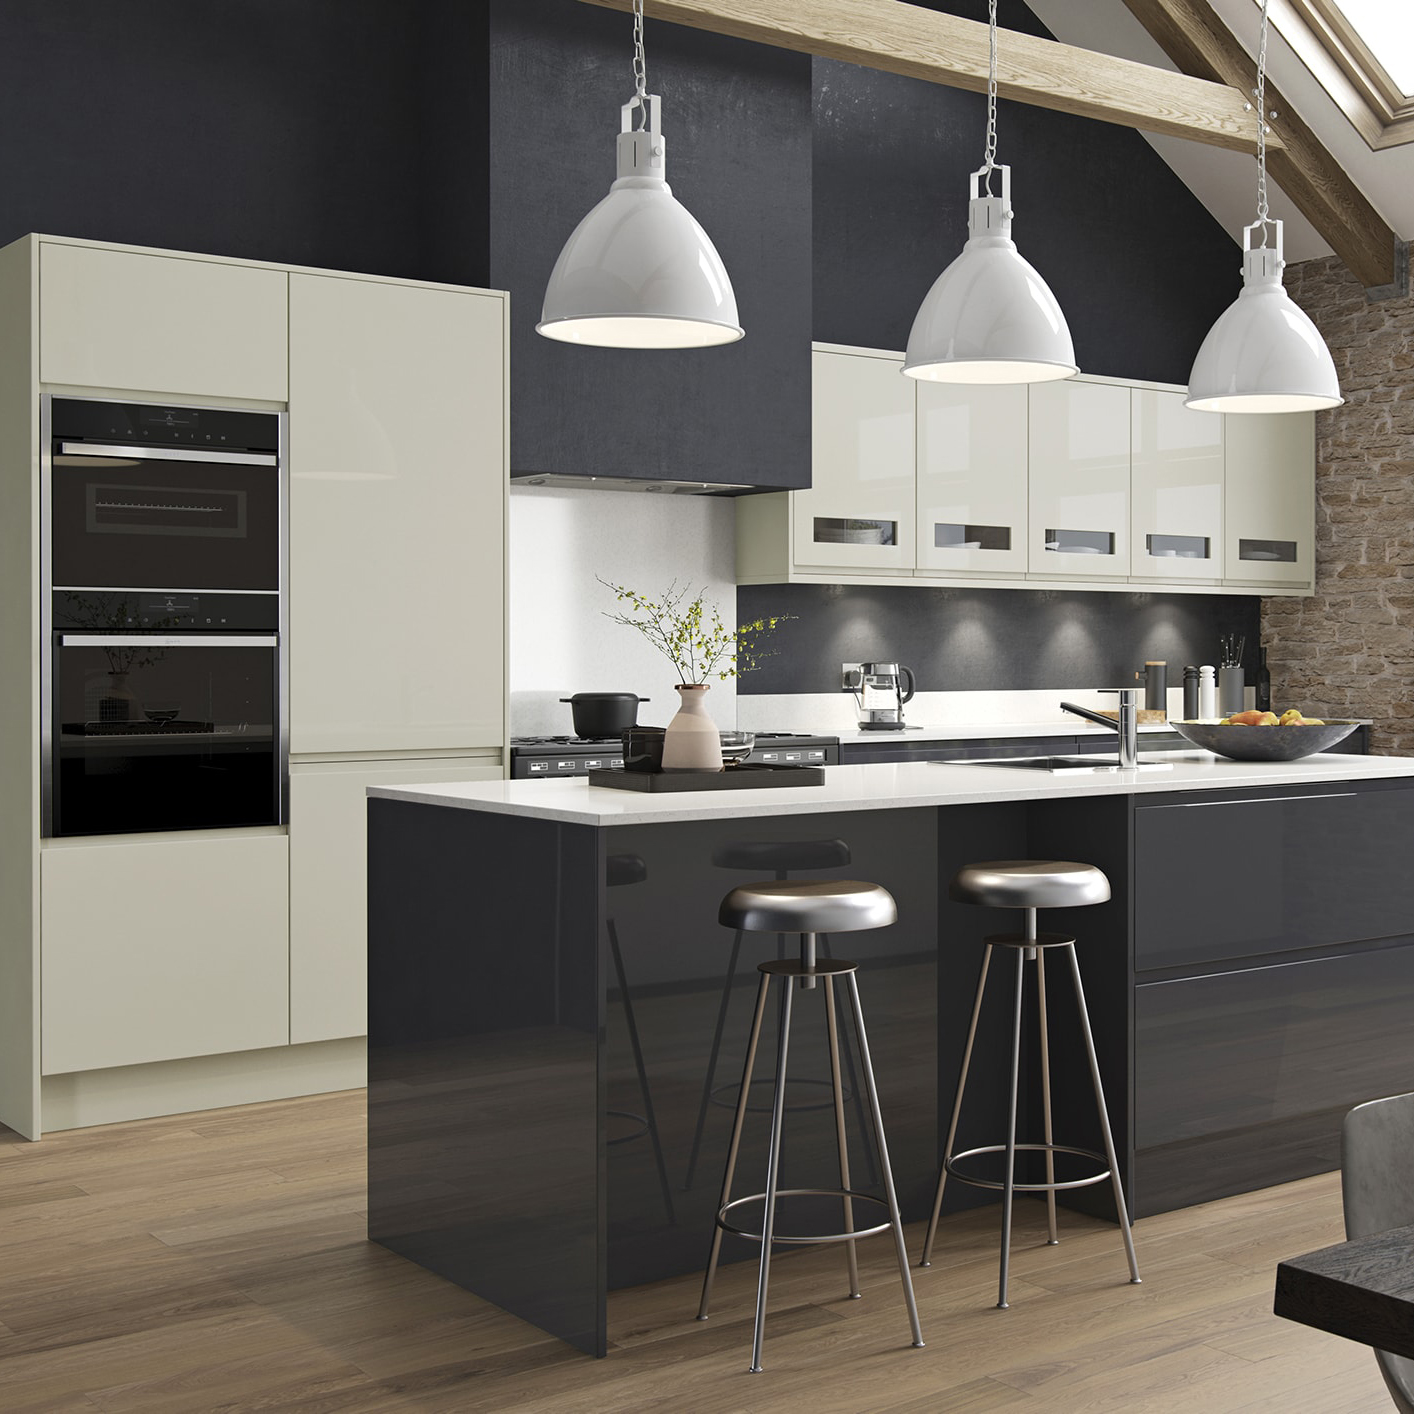 7 Must-Do's For A Well-Designed Kitchen